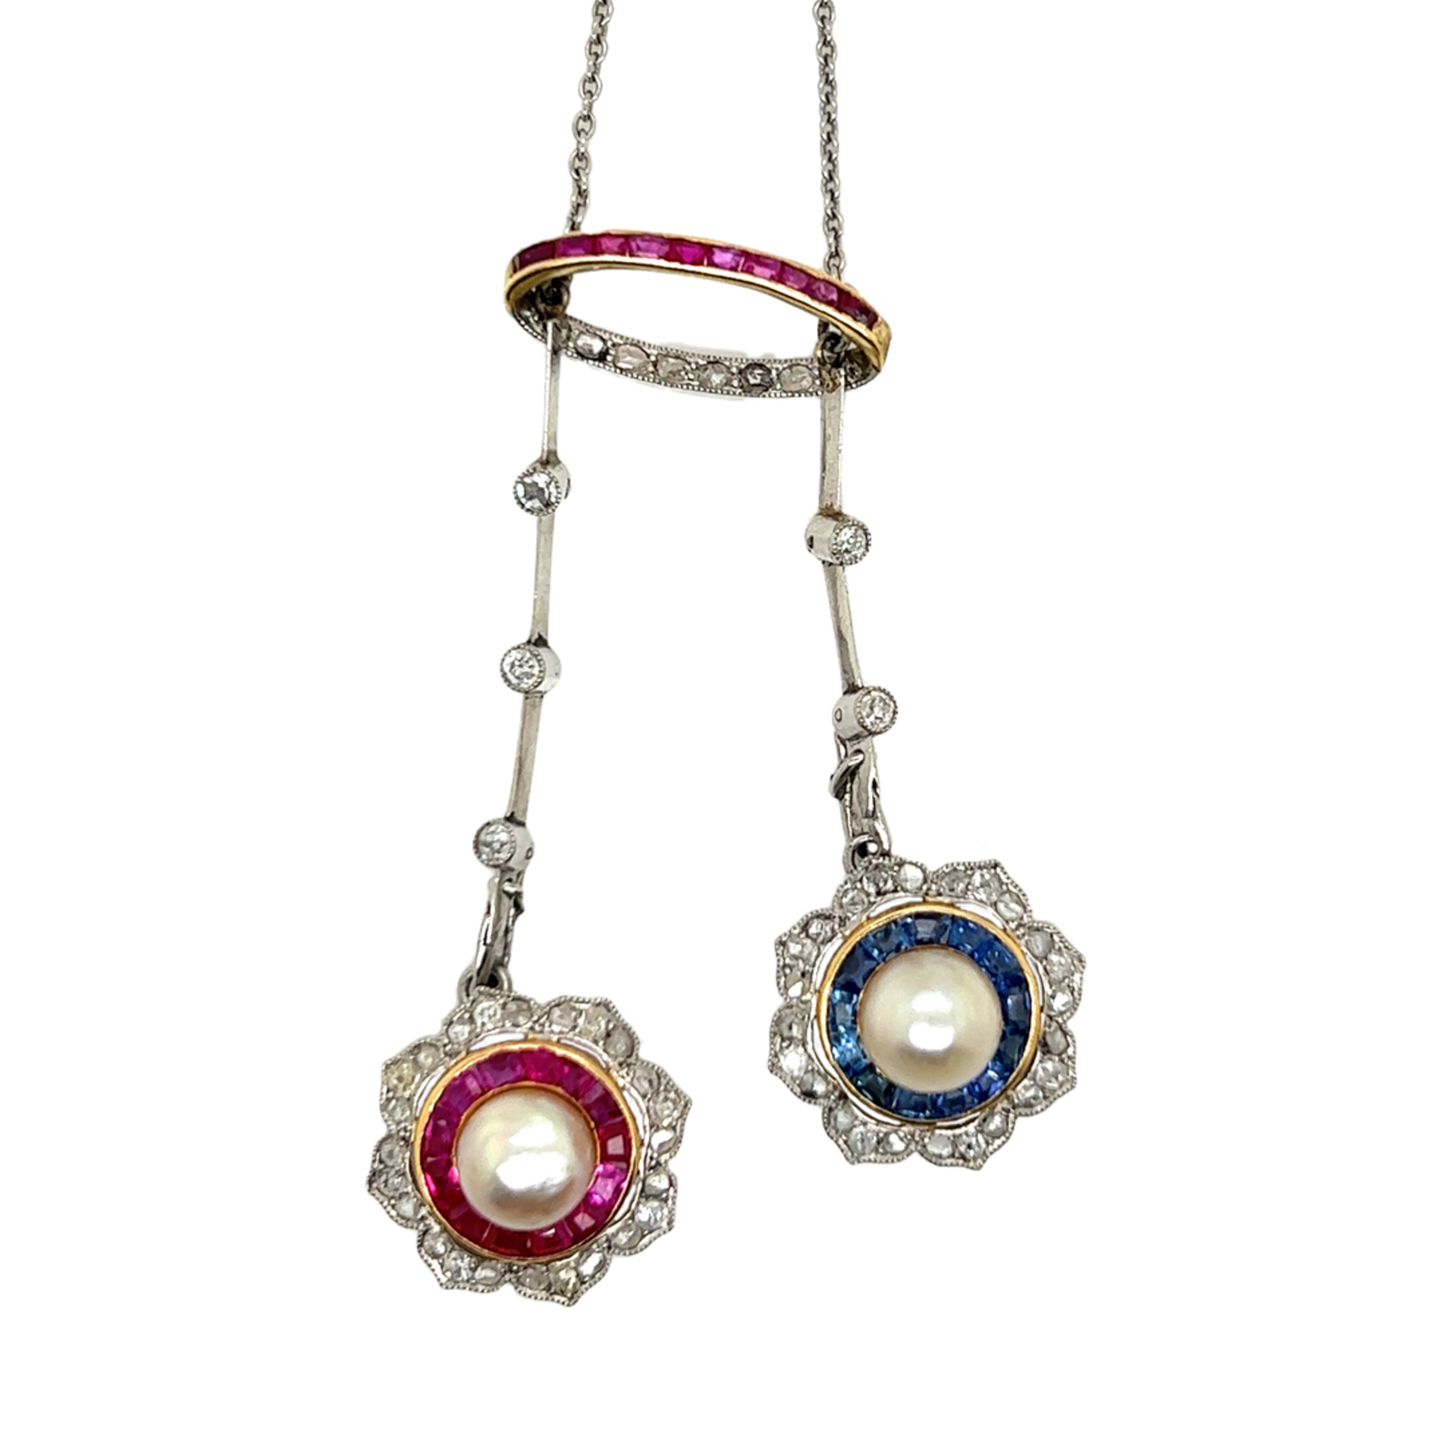 Edwardian Platinum & 18KT Yellow Gold Natural Pearl, Diamond, Ruby & Sapphire Necklace close-up of pendant